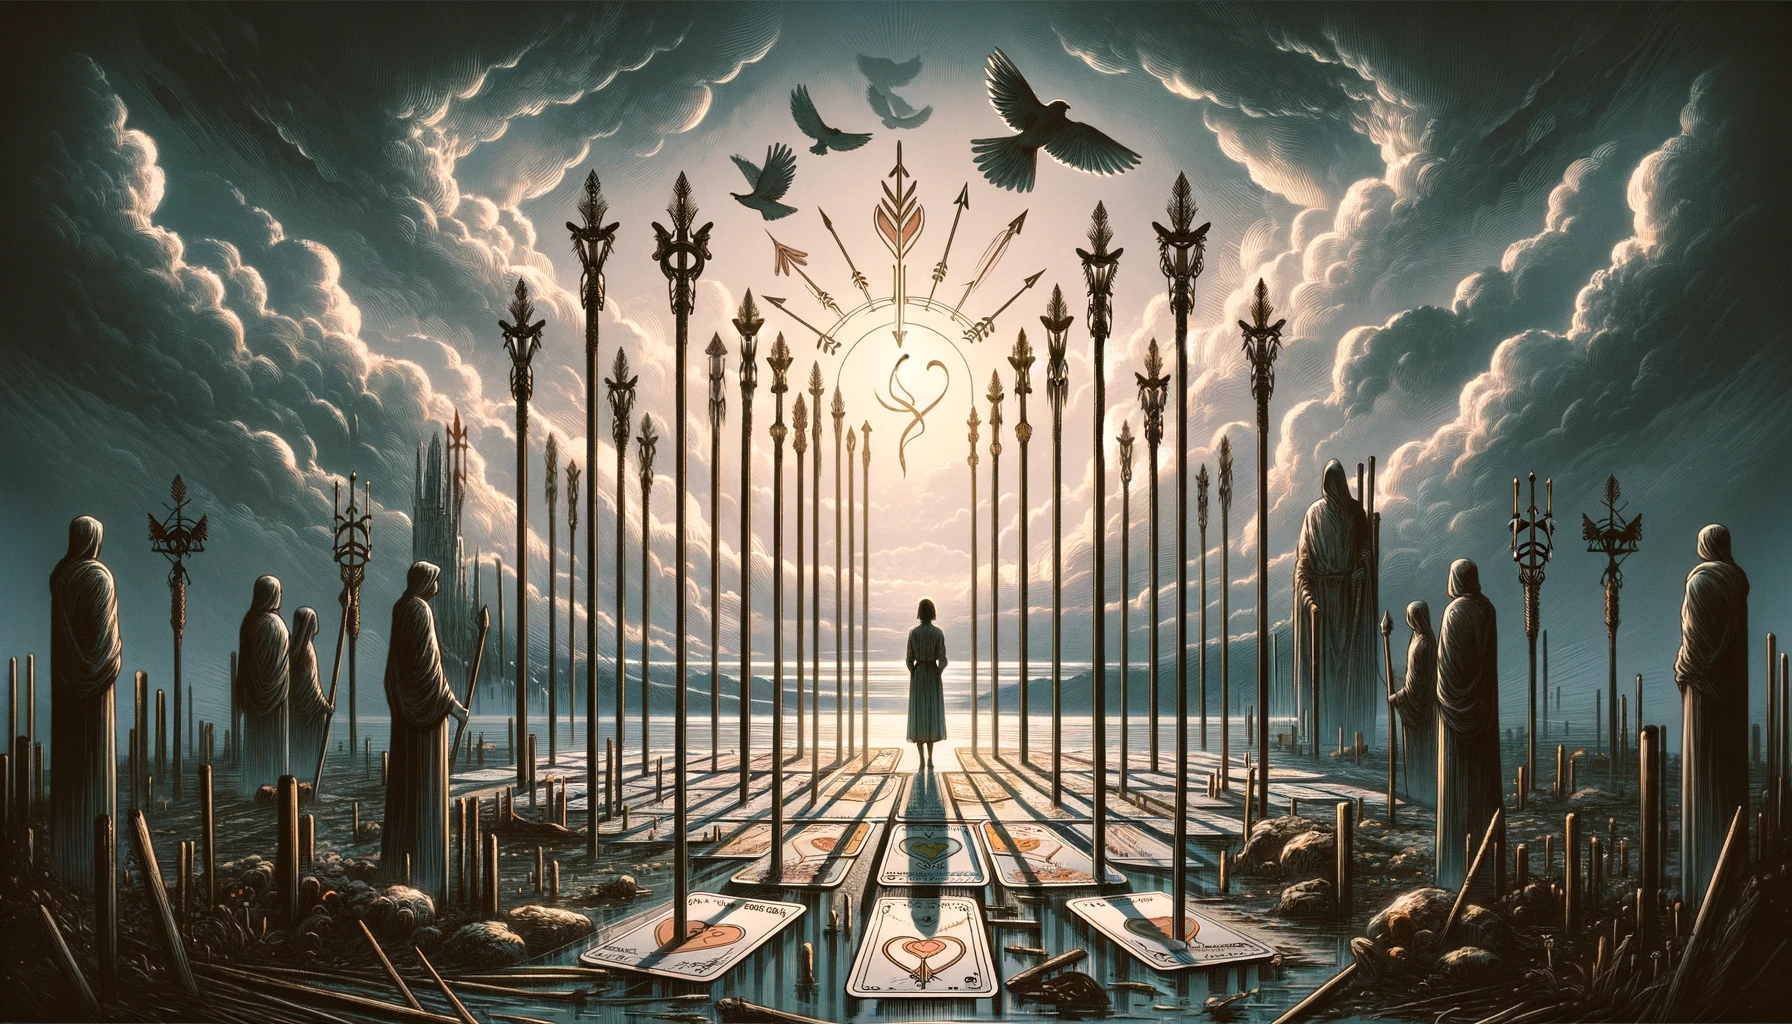 The image embodies resilience and determination in a relationship, symbolized by the Nine of Wands. A couple stands together, facing challenges with strength and unity. The atmosphere conveys perseverance and the willingness to protect their love despite past obstacles. This visualization highlights themes of endurance, unwavering faith in love, and the courage to confront difficulties together.